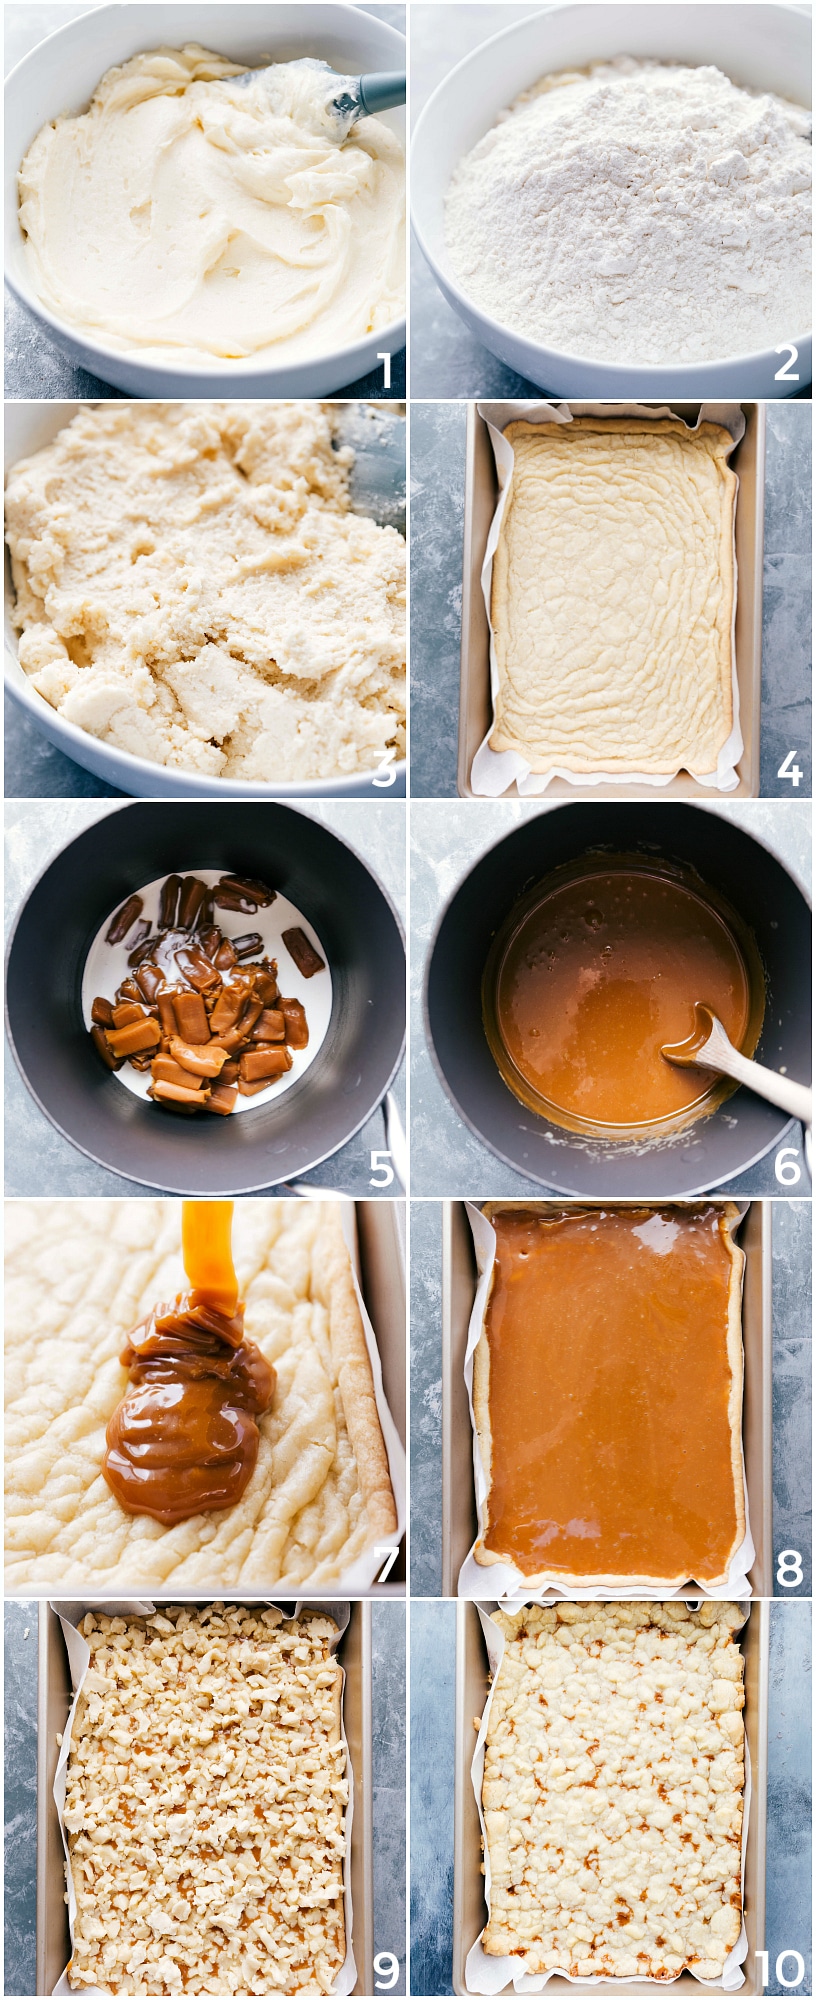 Process shots-- step-by-step images of making Caramel Cookie Bars.